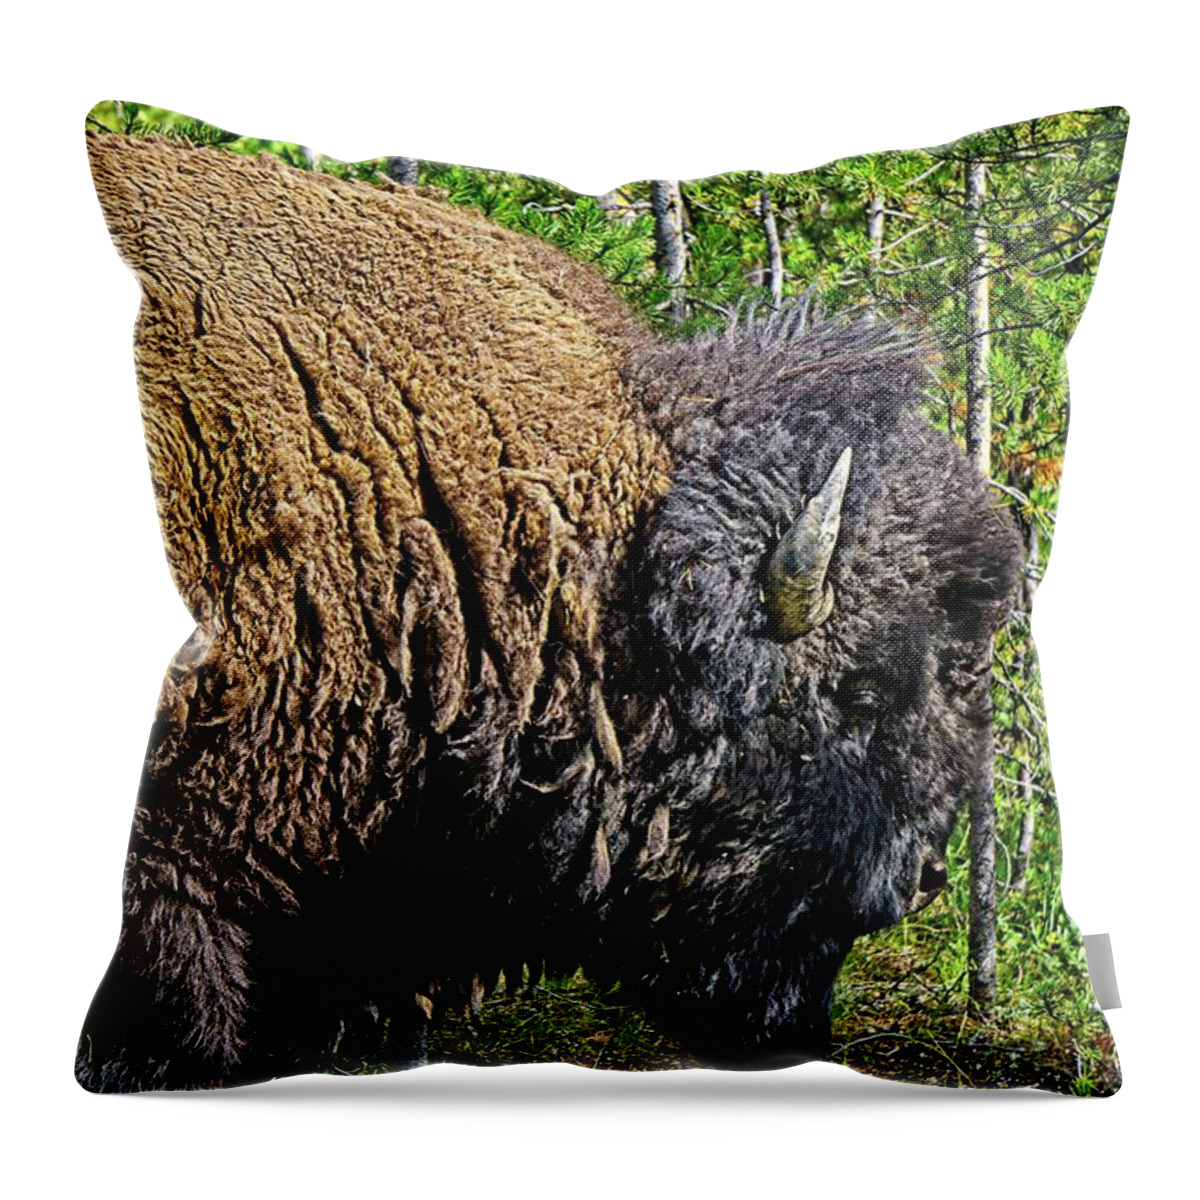 Animal Throw Pillow featuring the photograph Buffalo Silhouette by David Desautel